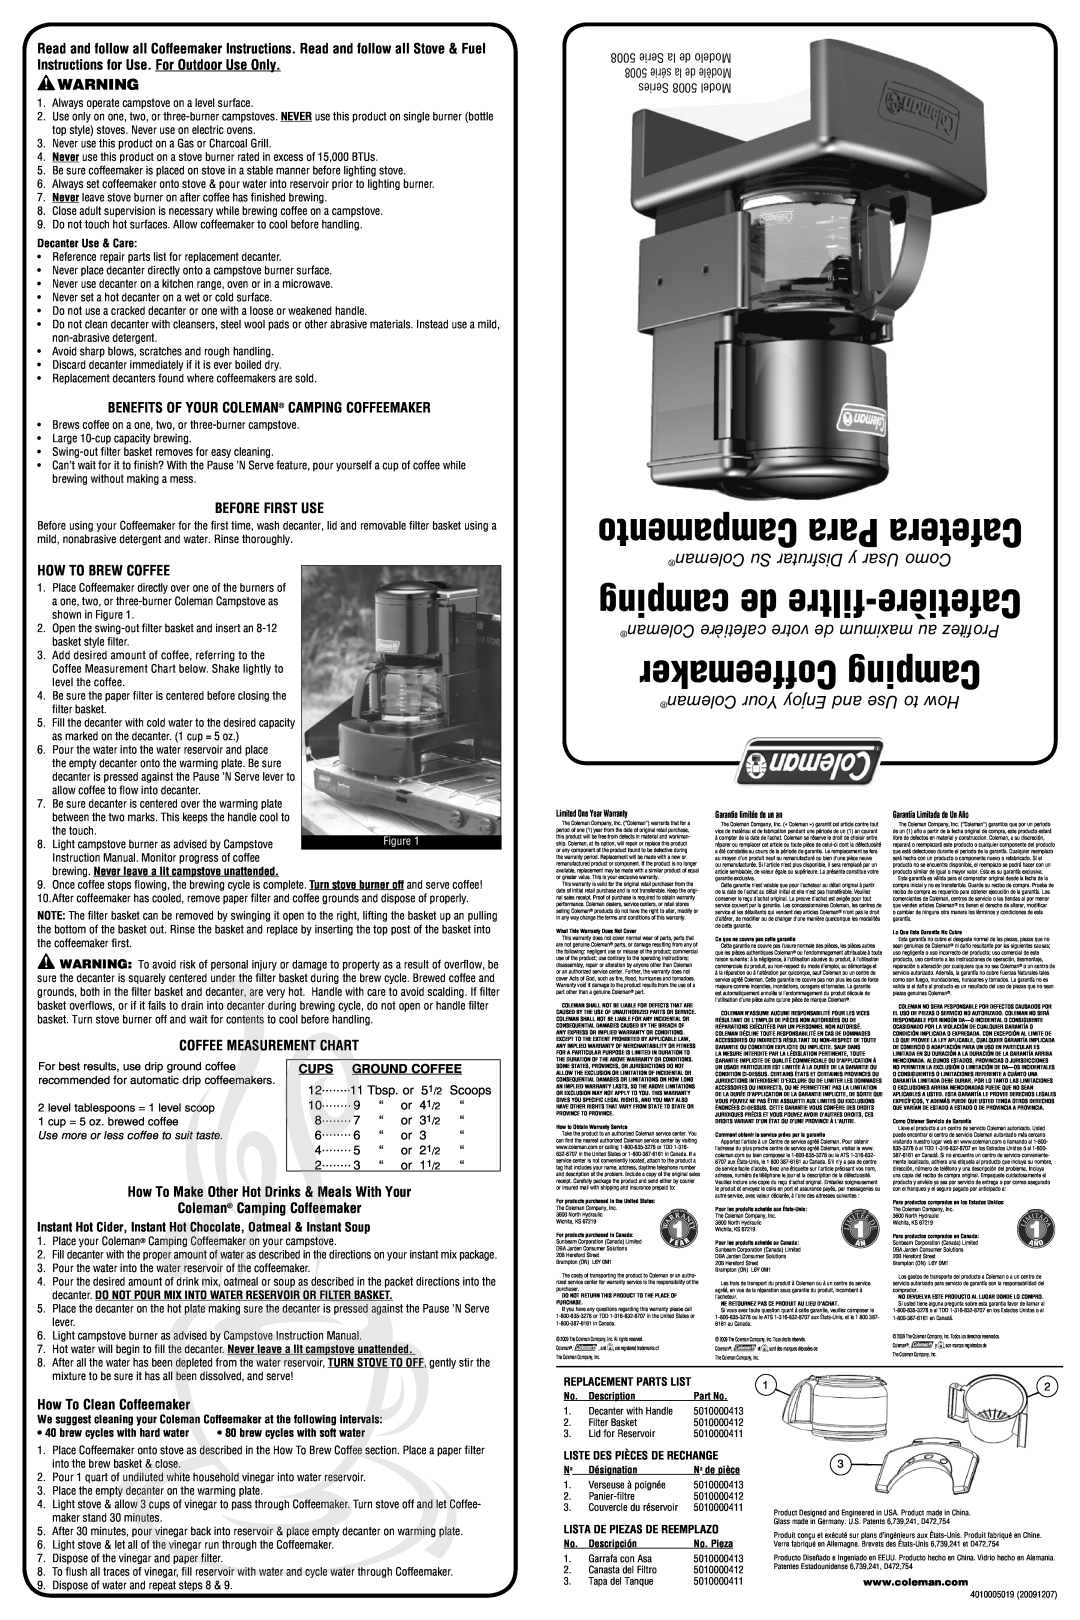 Coleman 5008 instruction manual Benefits Of Your Coleman Camping Coffeemaker, Before First Use, How To Brew Coffee 